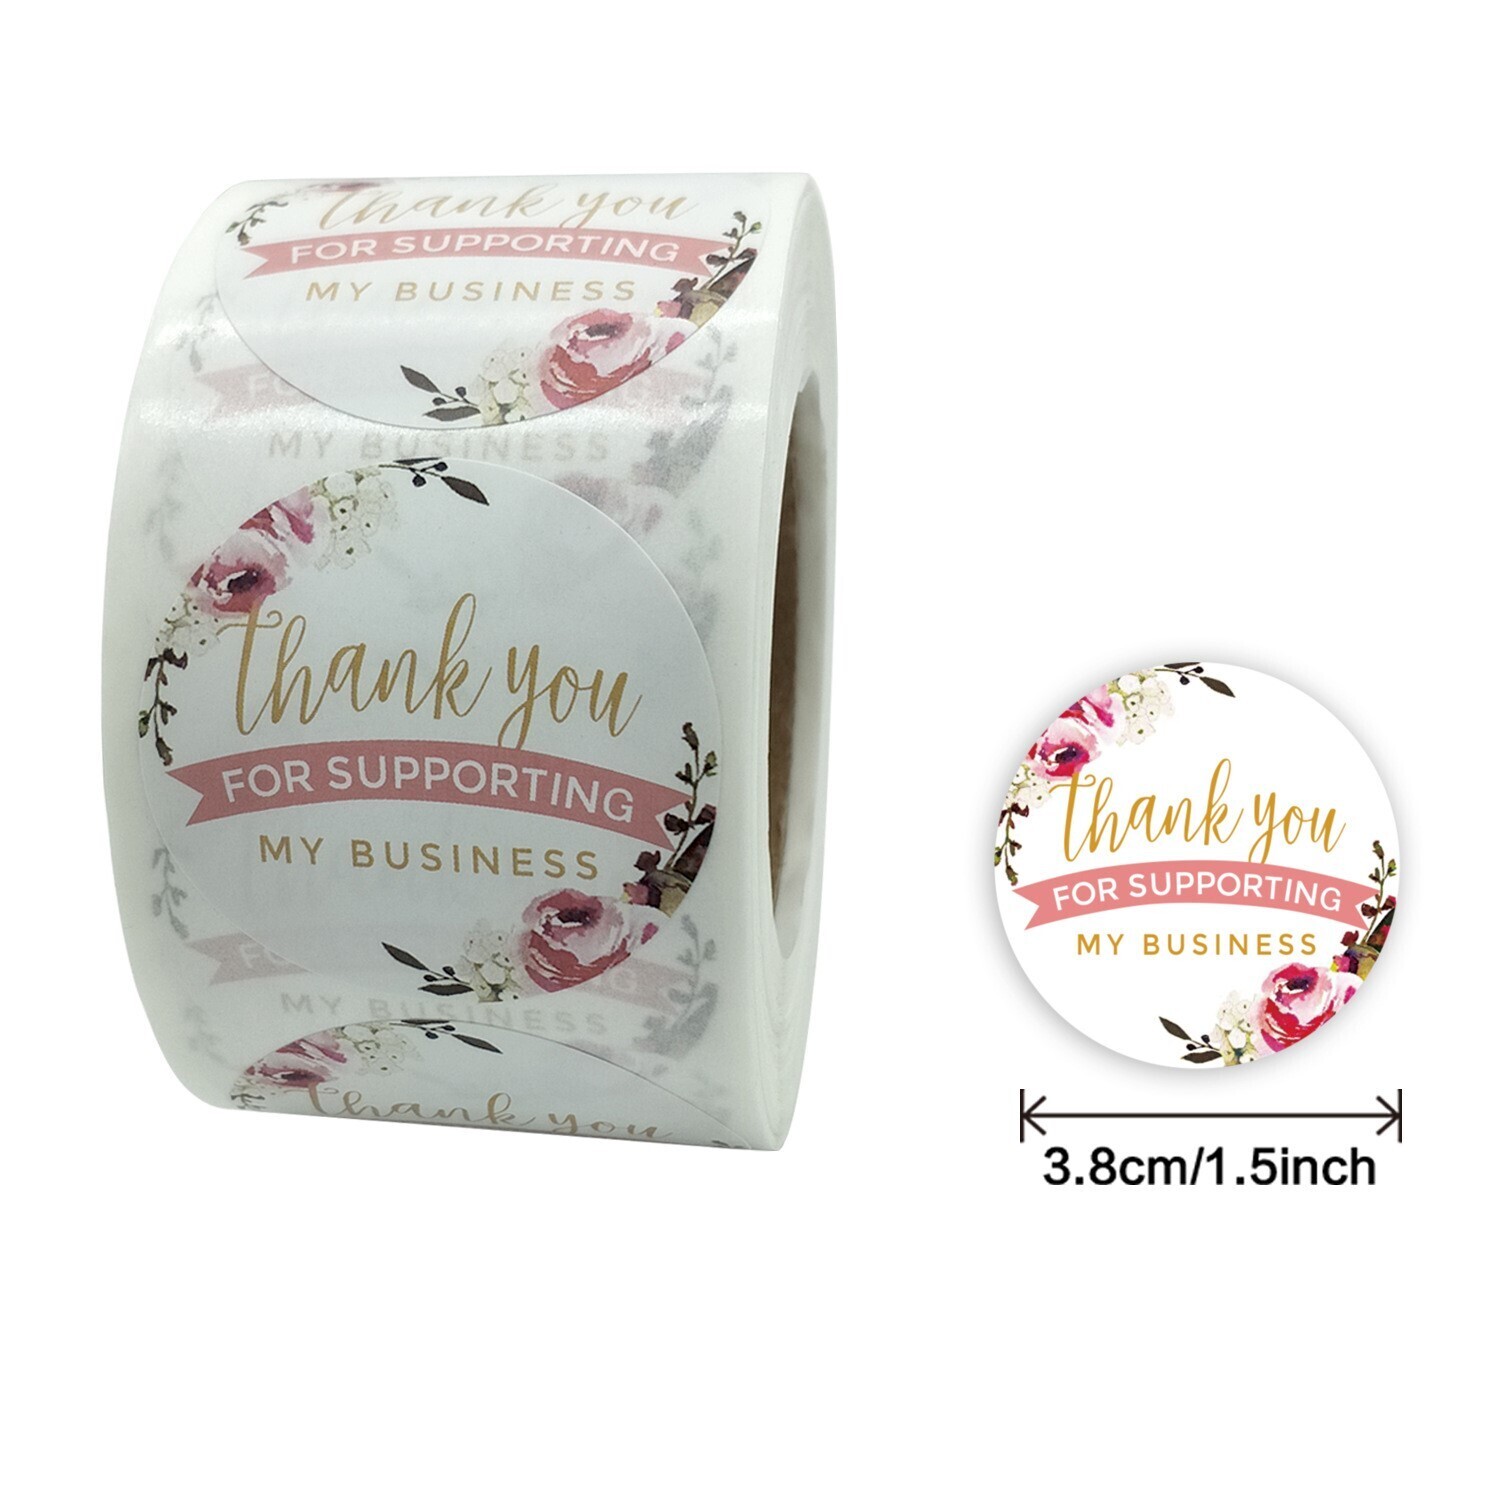 "Thank You for Supporting My Business" | 1.5'' (38mm) Scrapbooking Gift Wrapping Sticker